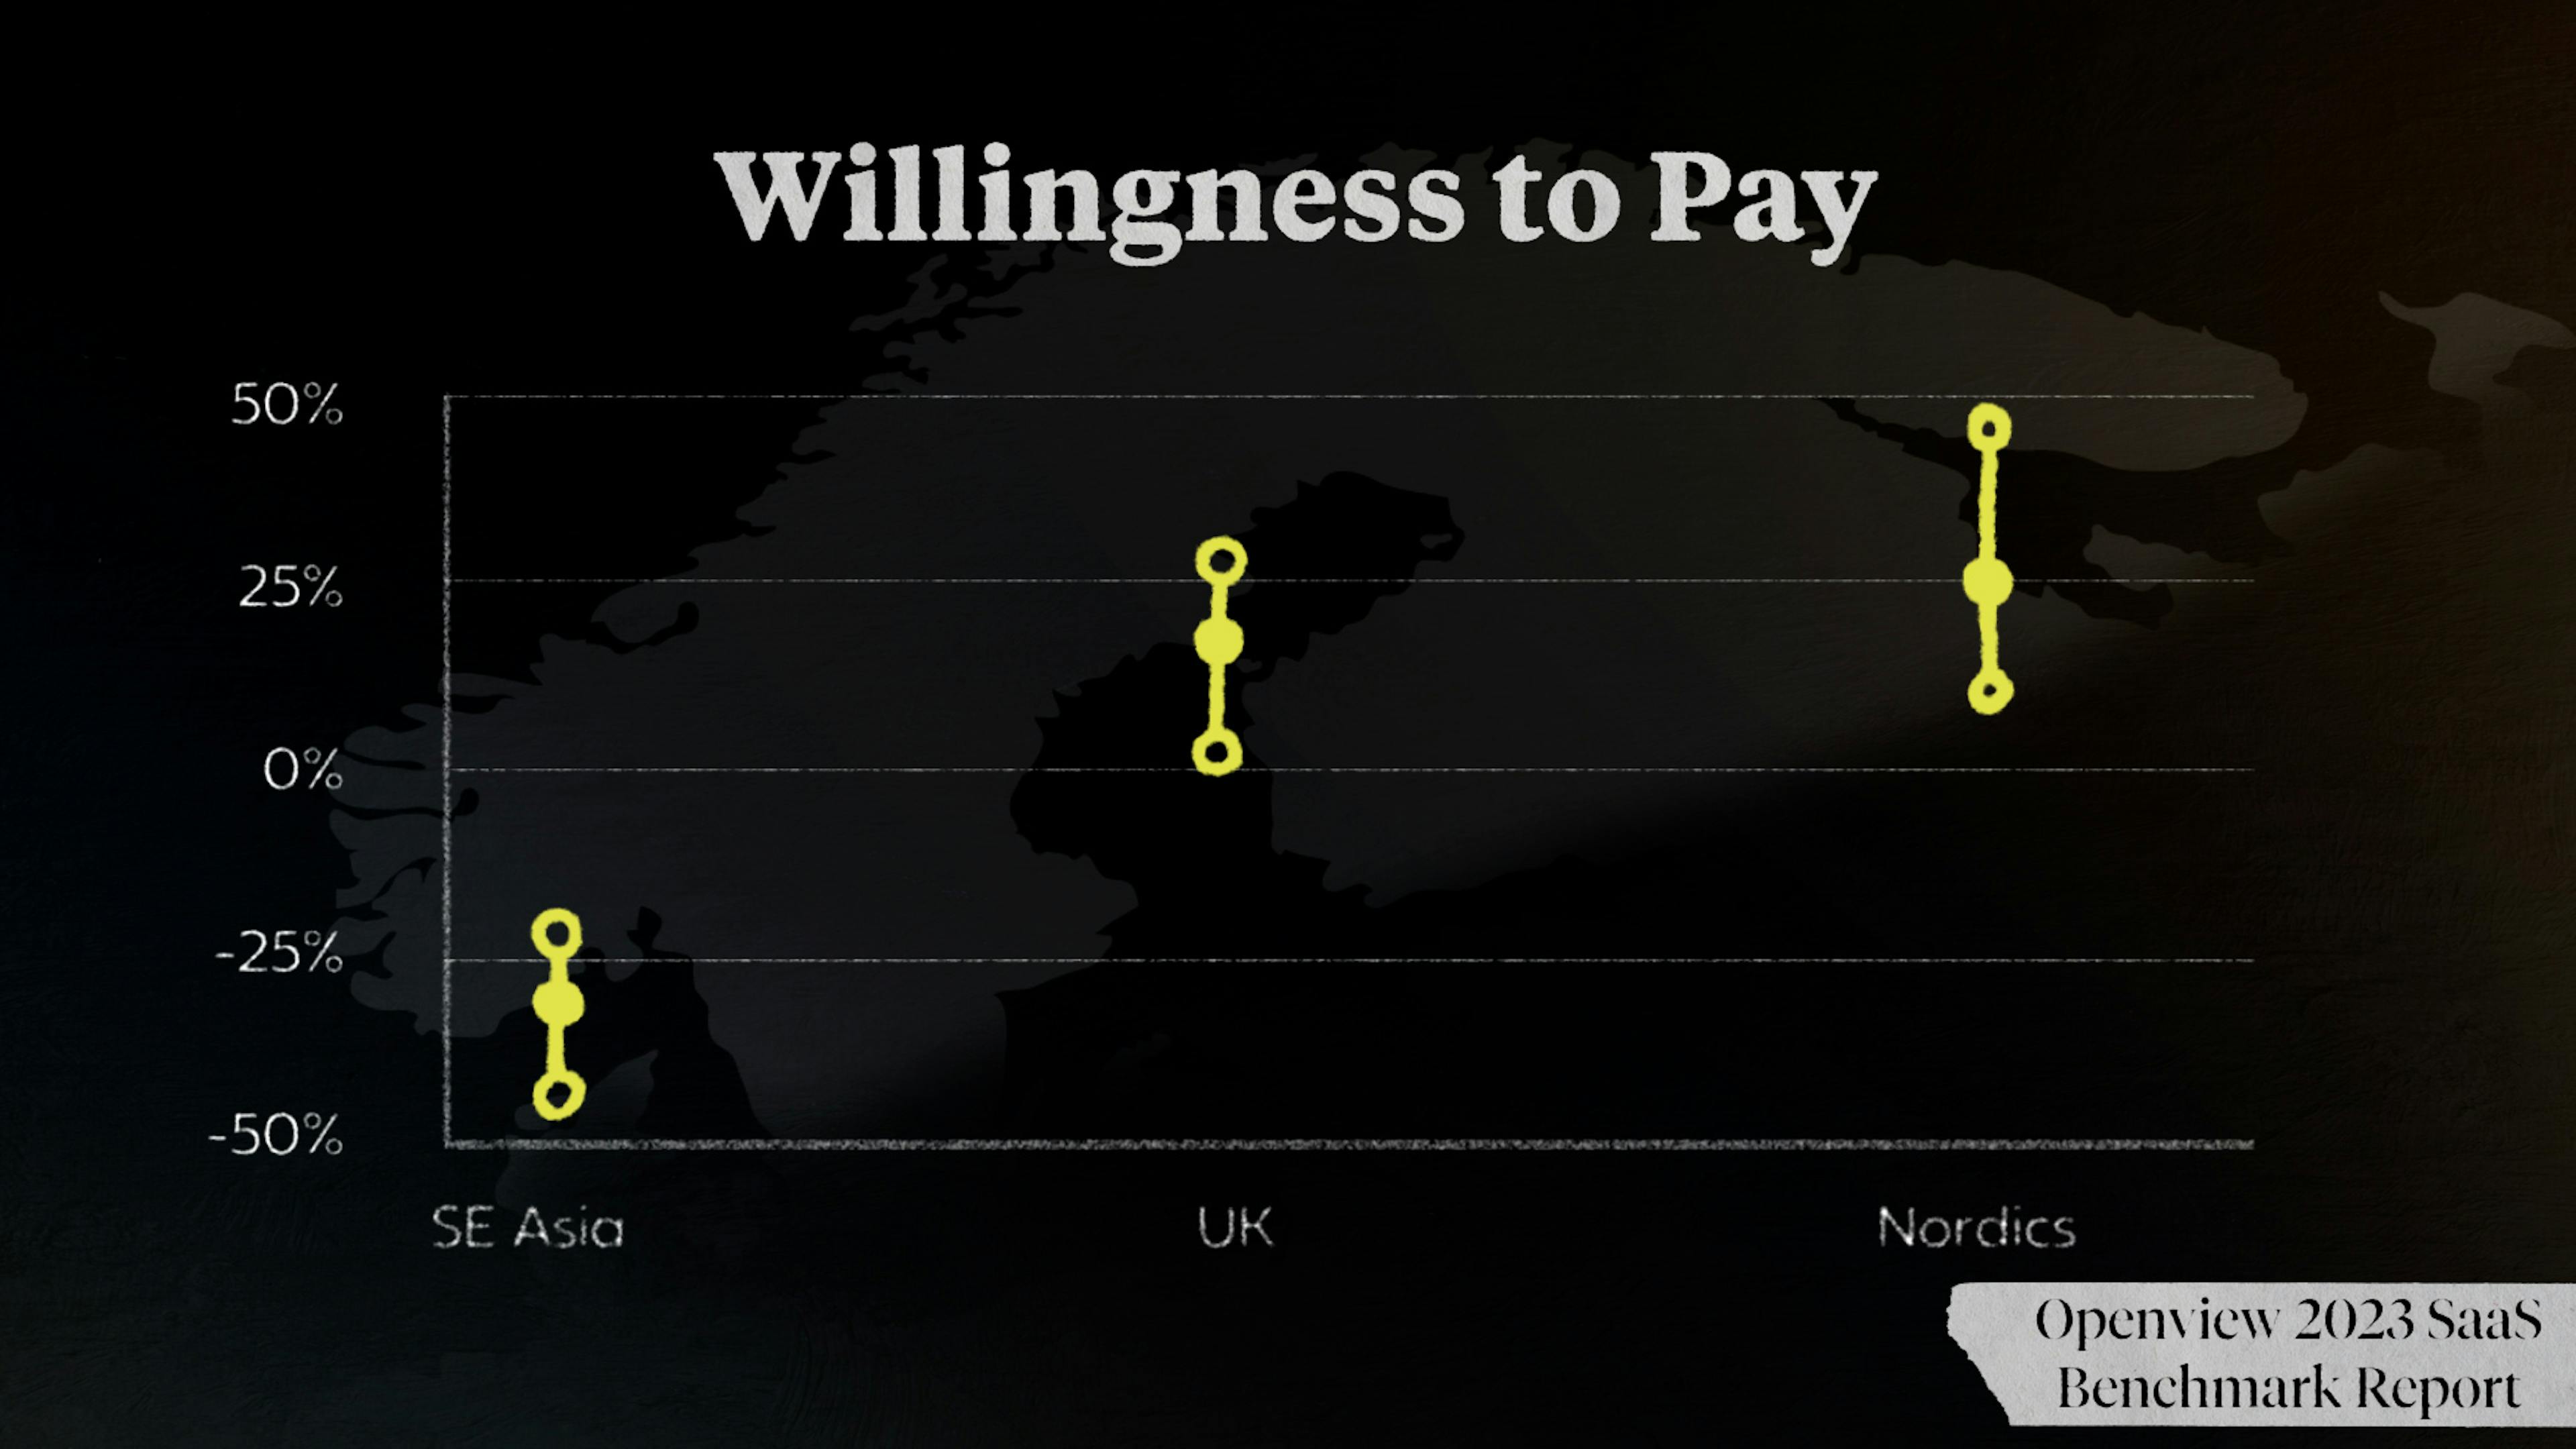 Willingness to Pay based on region